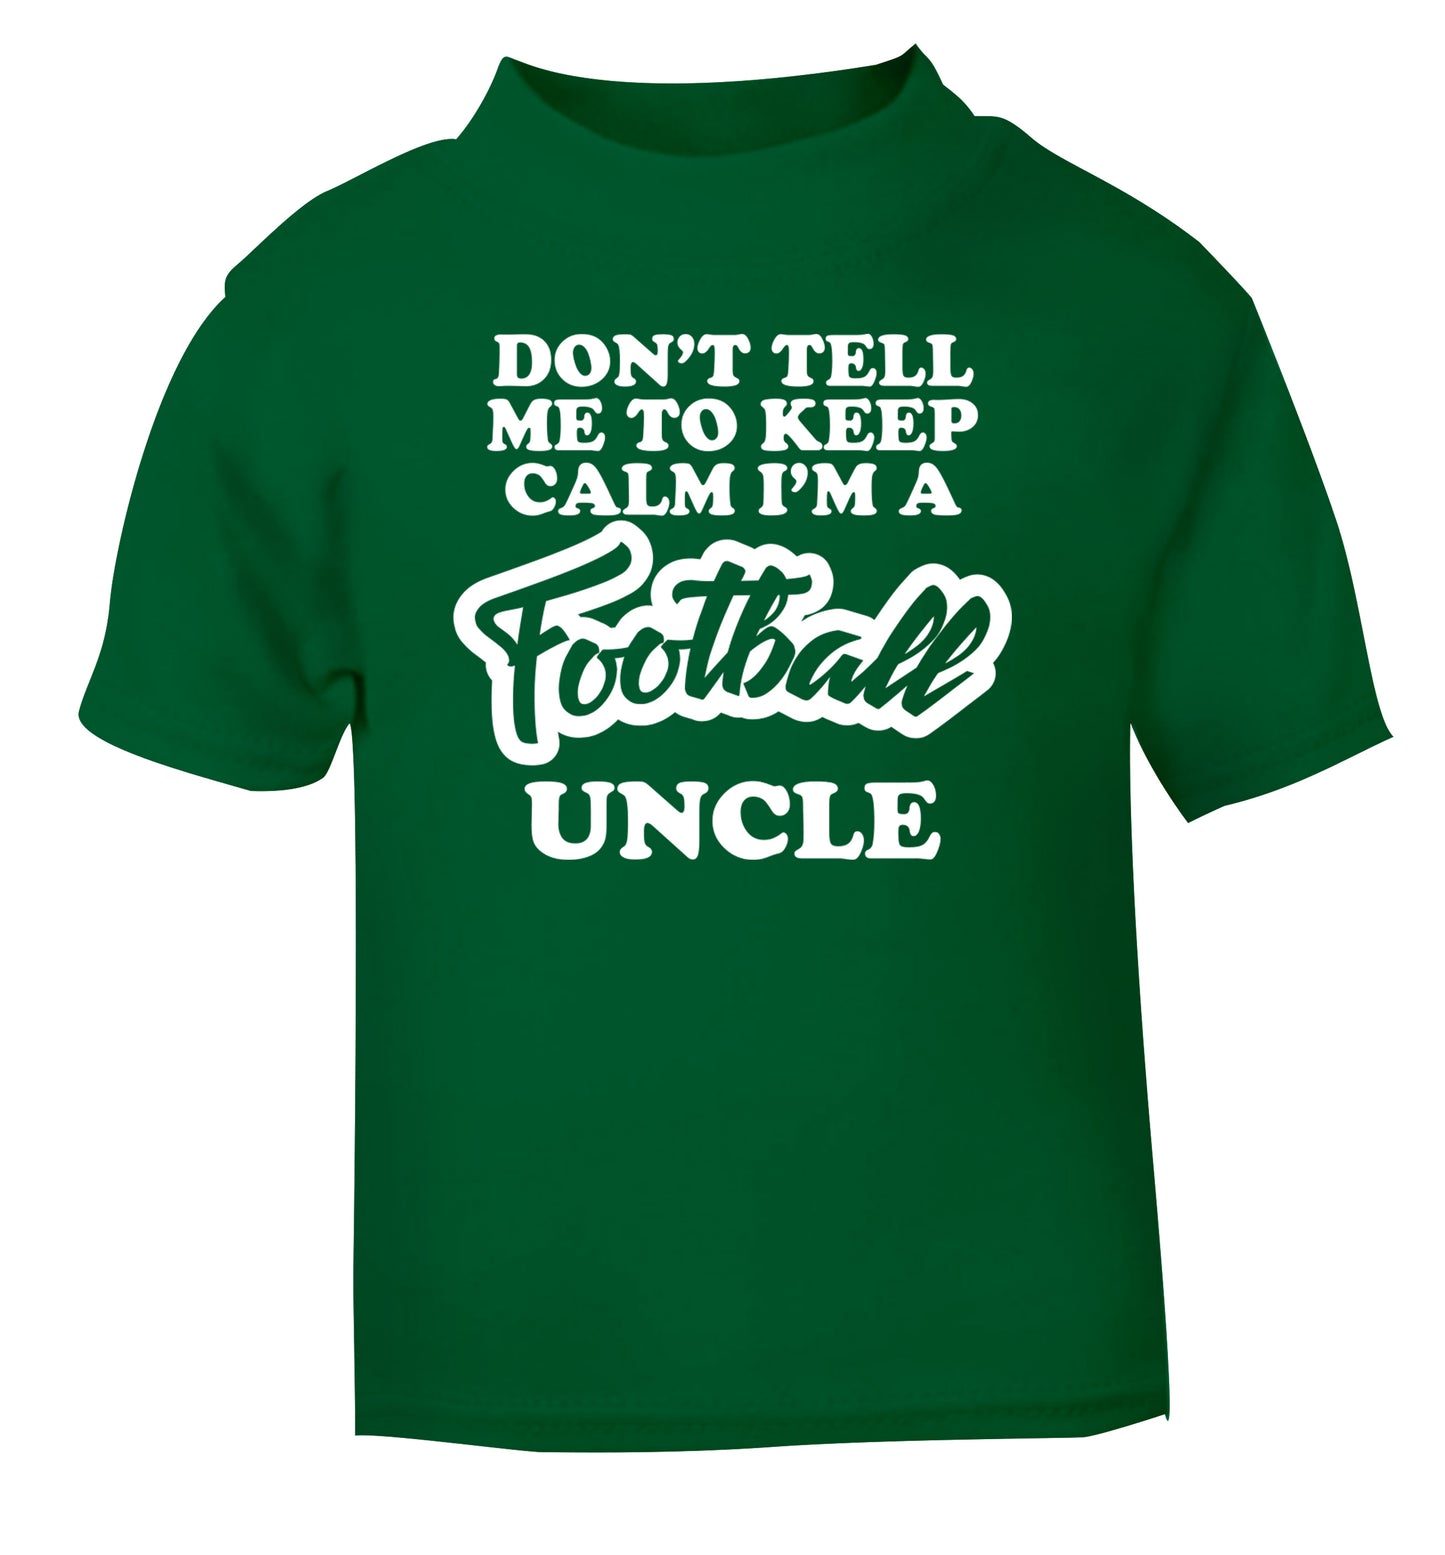 Don't tell me to keep calm I'm a football uncle green Baby Toddler Tshirt 2 Years